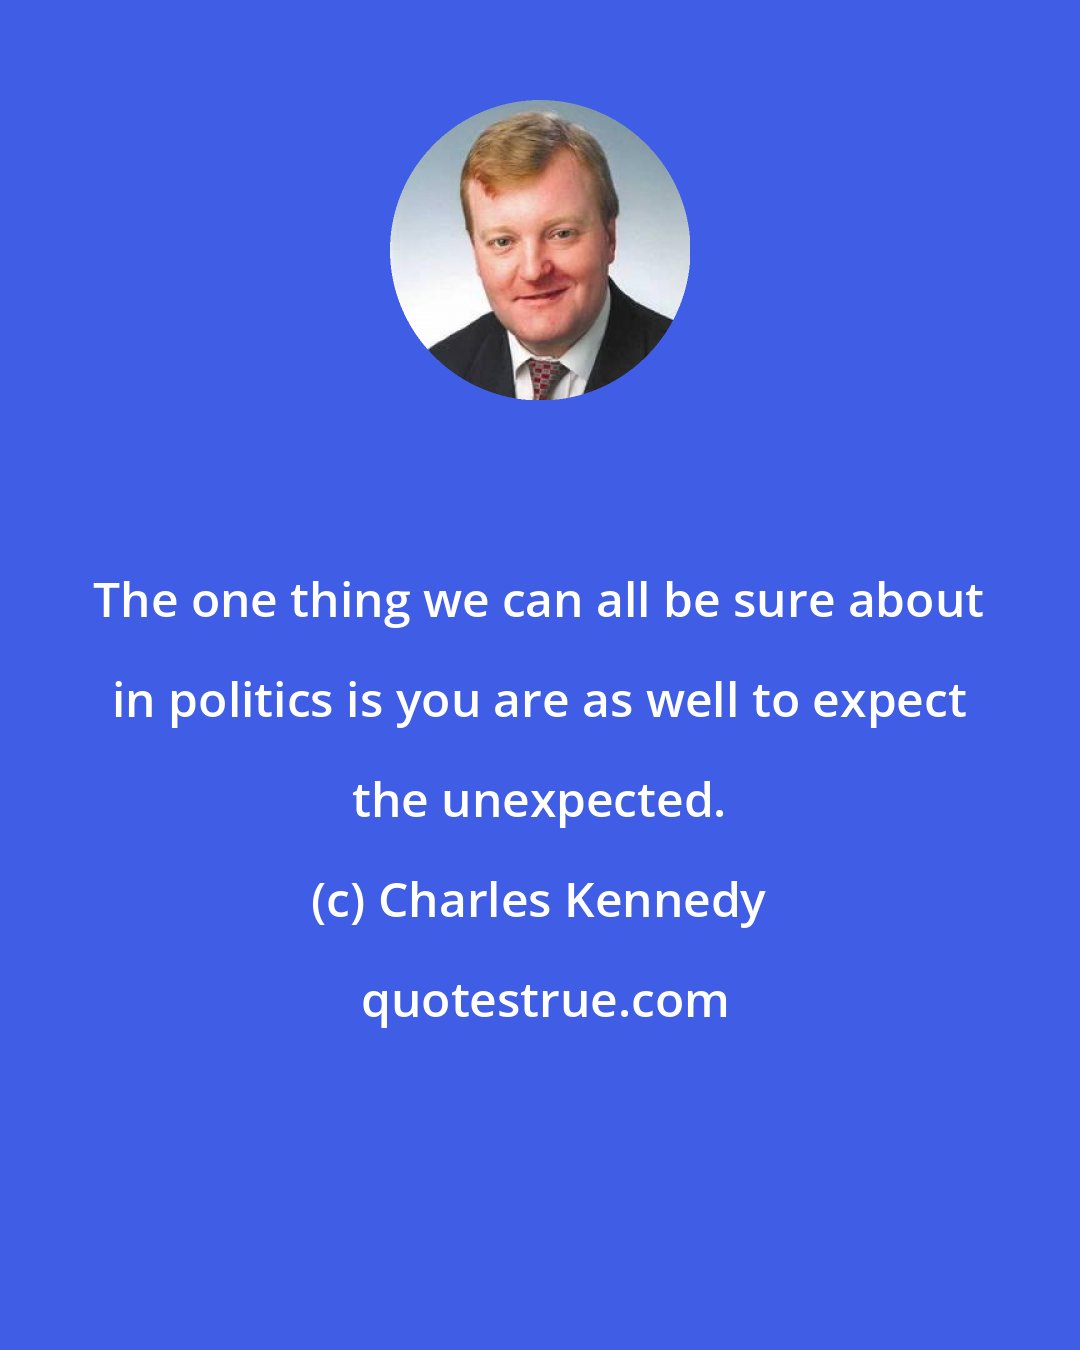 Charles Kennedy: The one thing we can all be sure about in politics is you are as well to expect the unexpected.